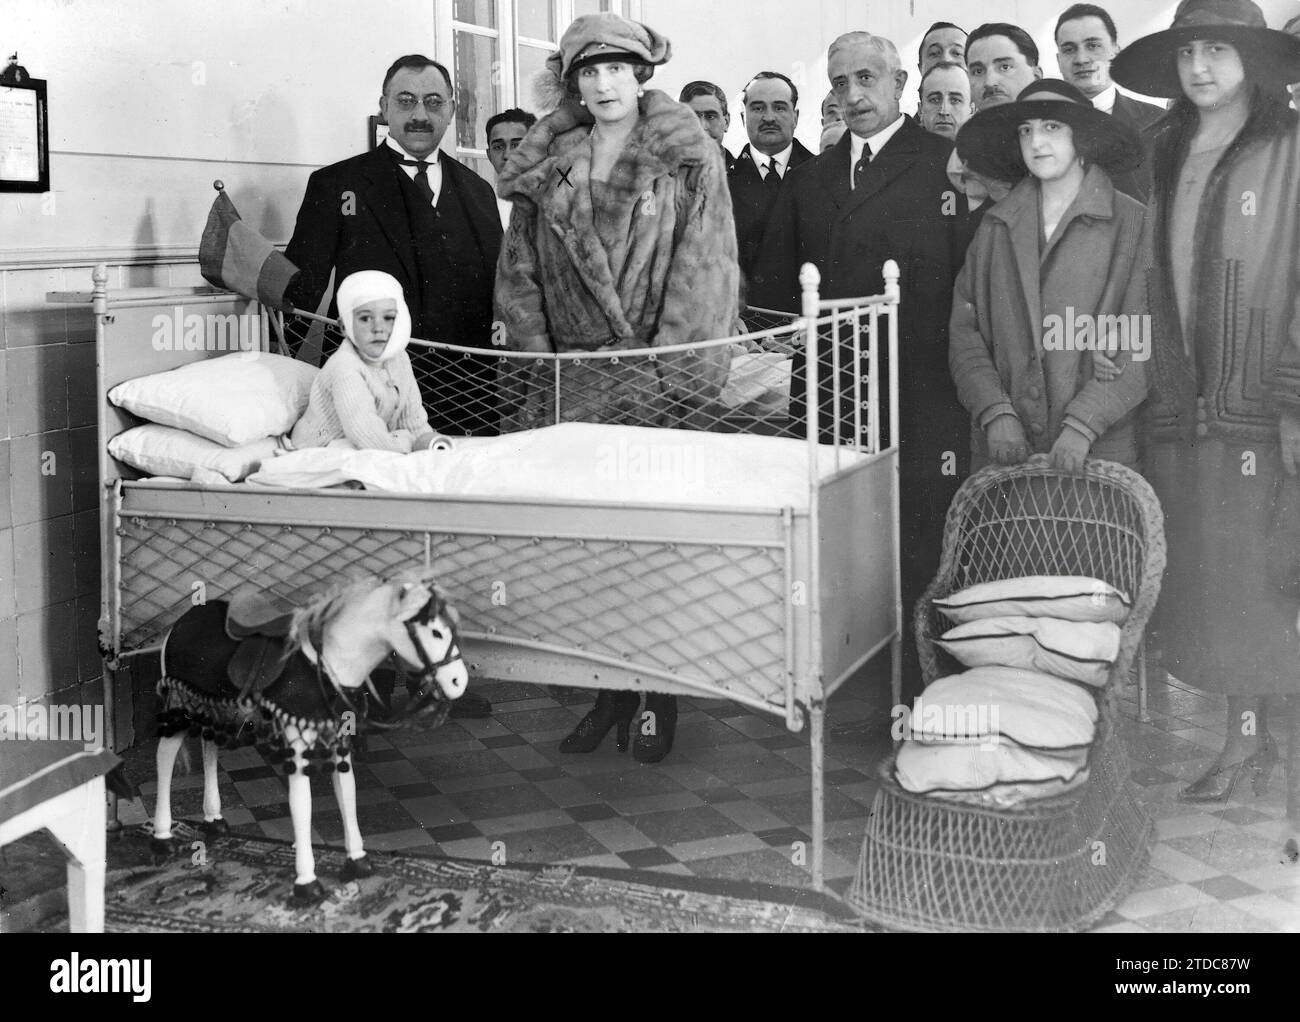 12/25/1922. Madrid - in the hospital of the child Jesus Her Majesty Queen Victoria Distributing Toys to the Sick. Credit: Album / Archivo ABC / Julio Duque Stock Photo